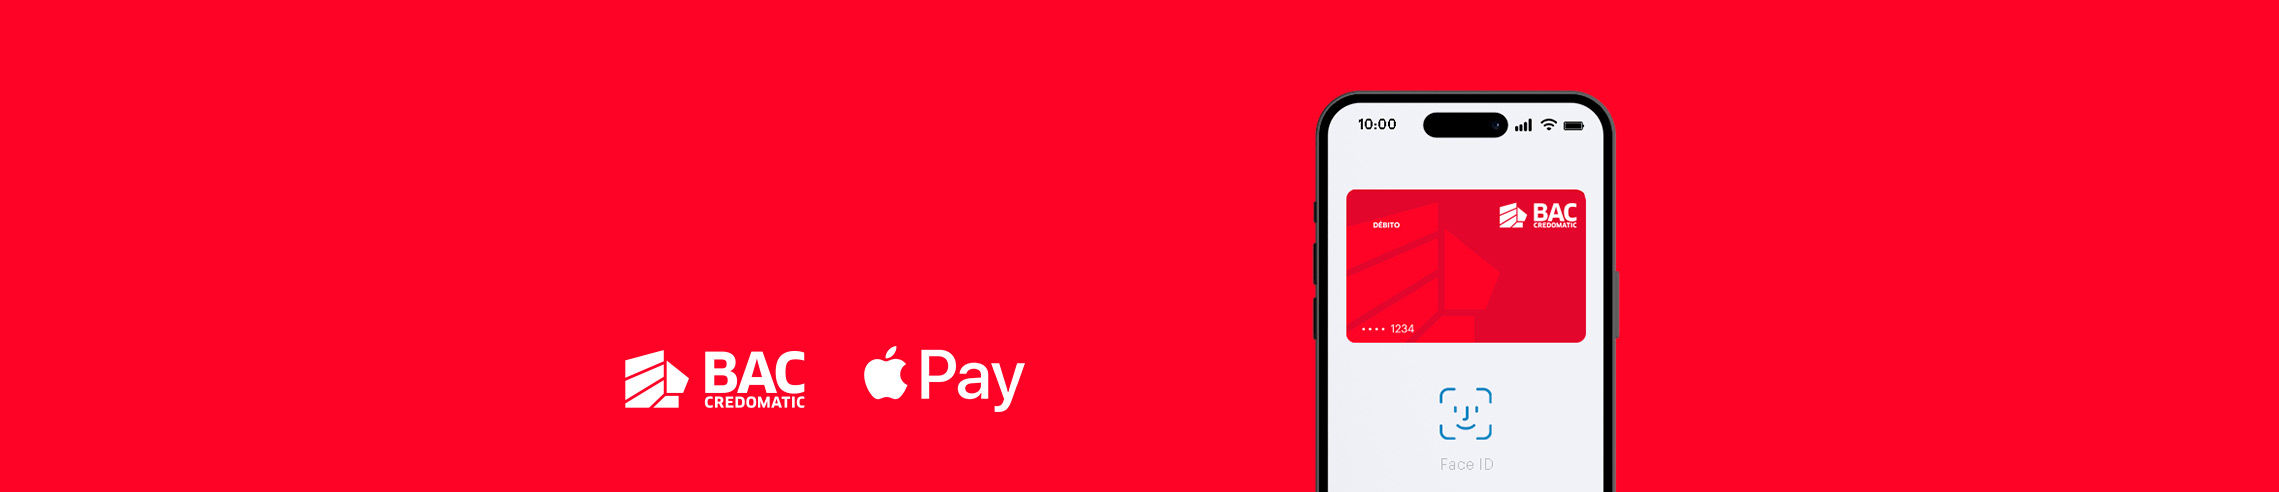 Banner promocional Apple pay BAC